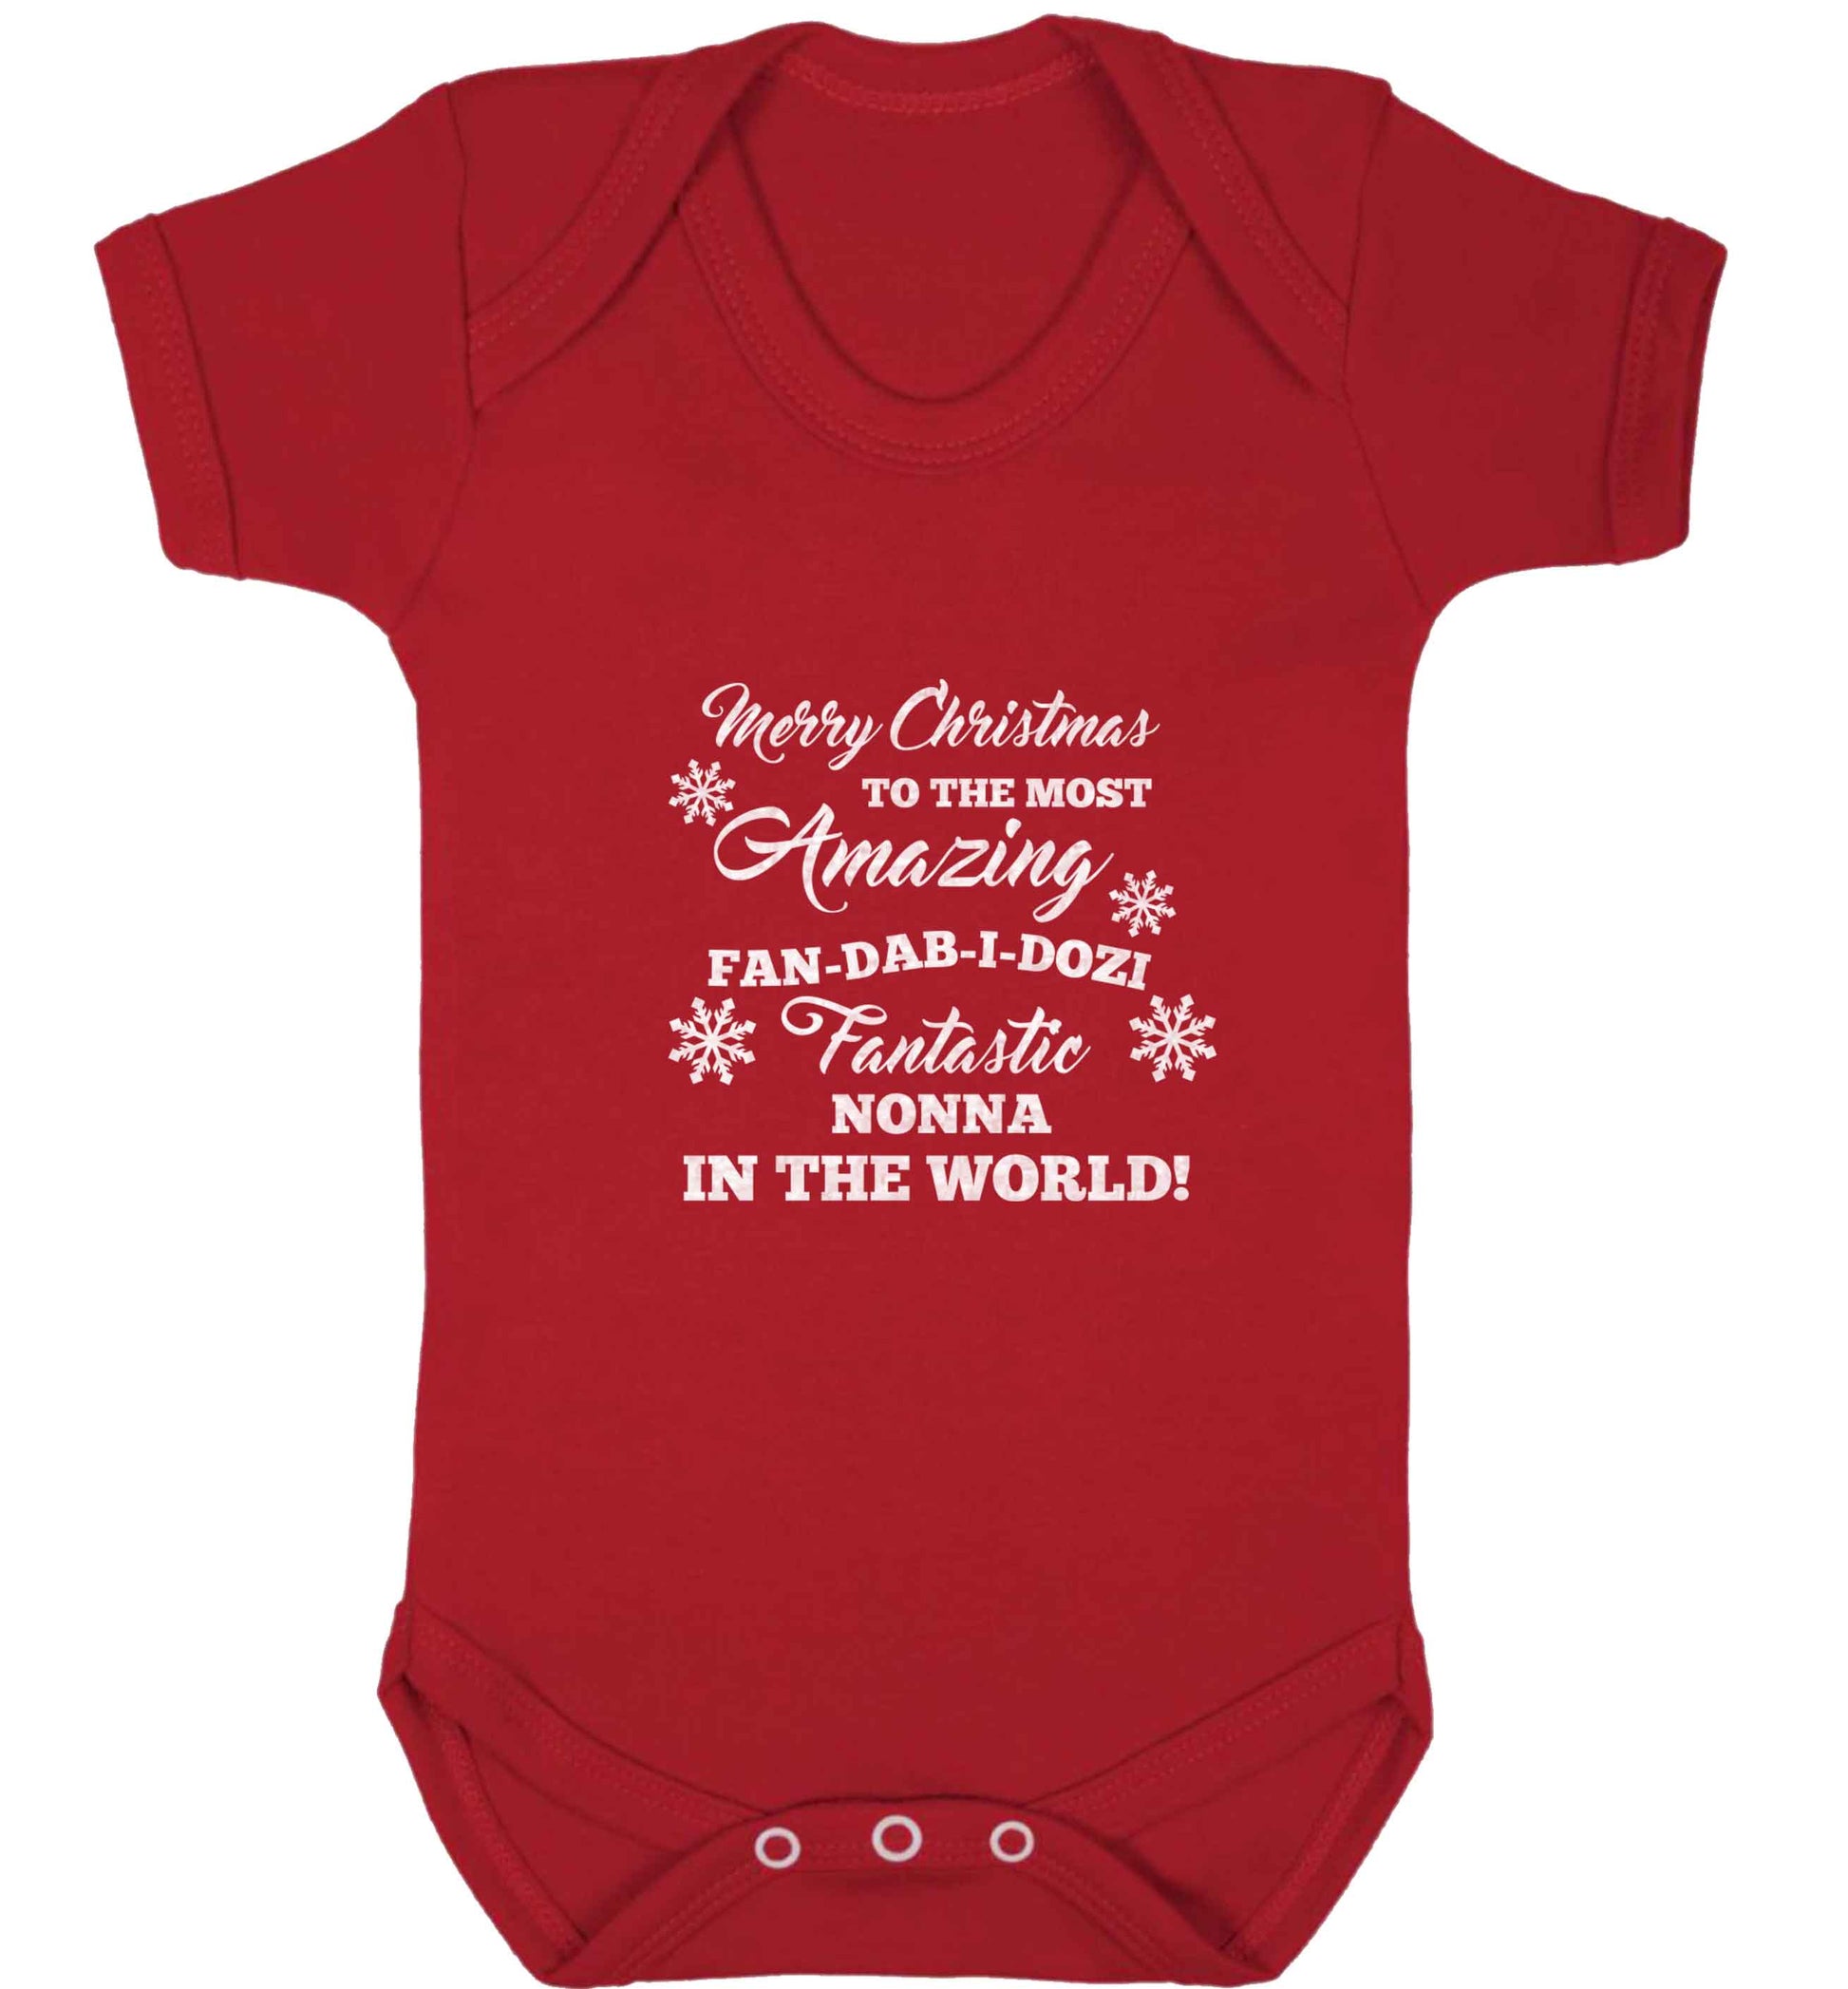 Merry Christmas to the most amazing fan-dab-i-dozi fantasic Nonna in the world baby vest red 18-24 months